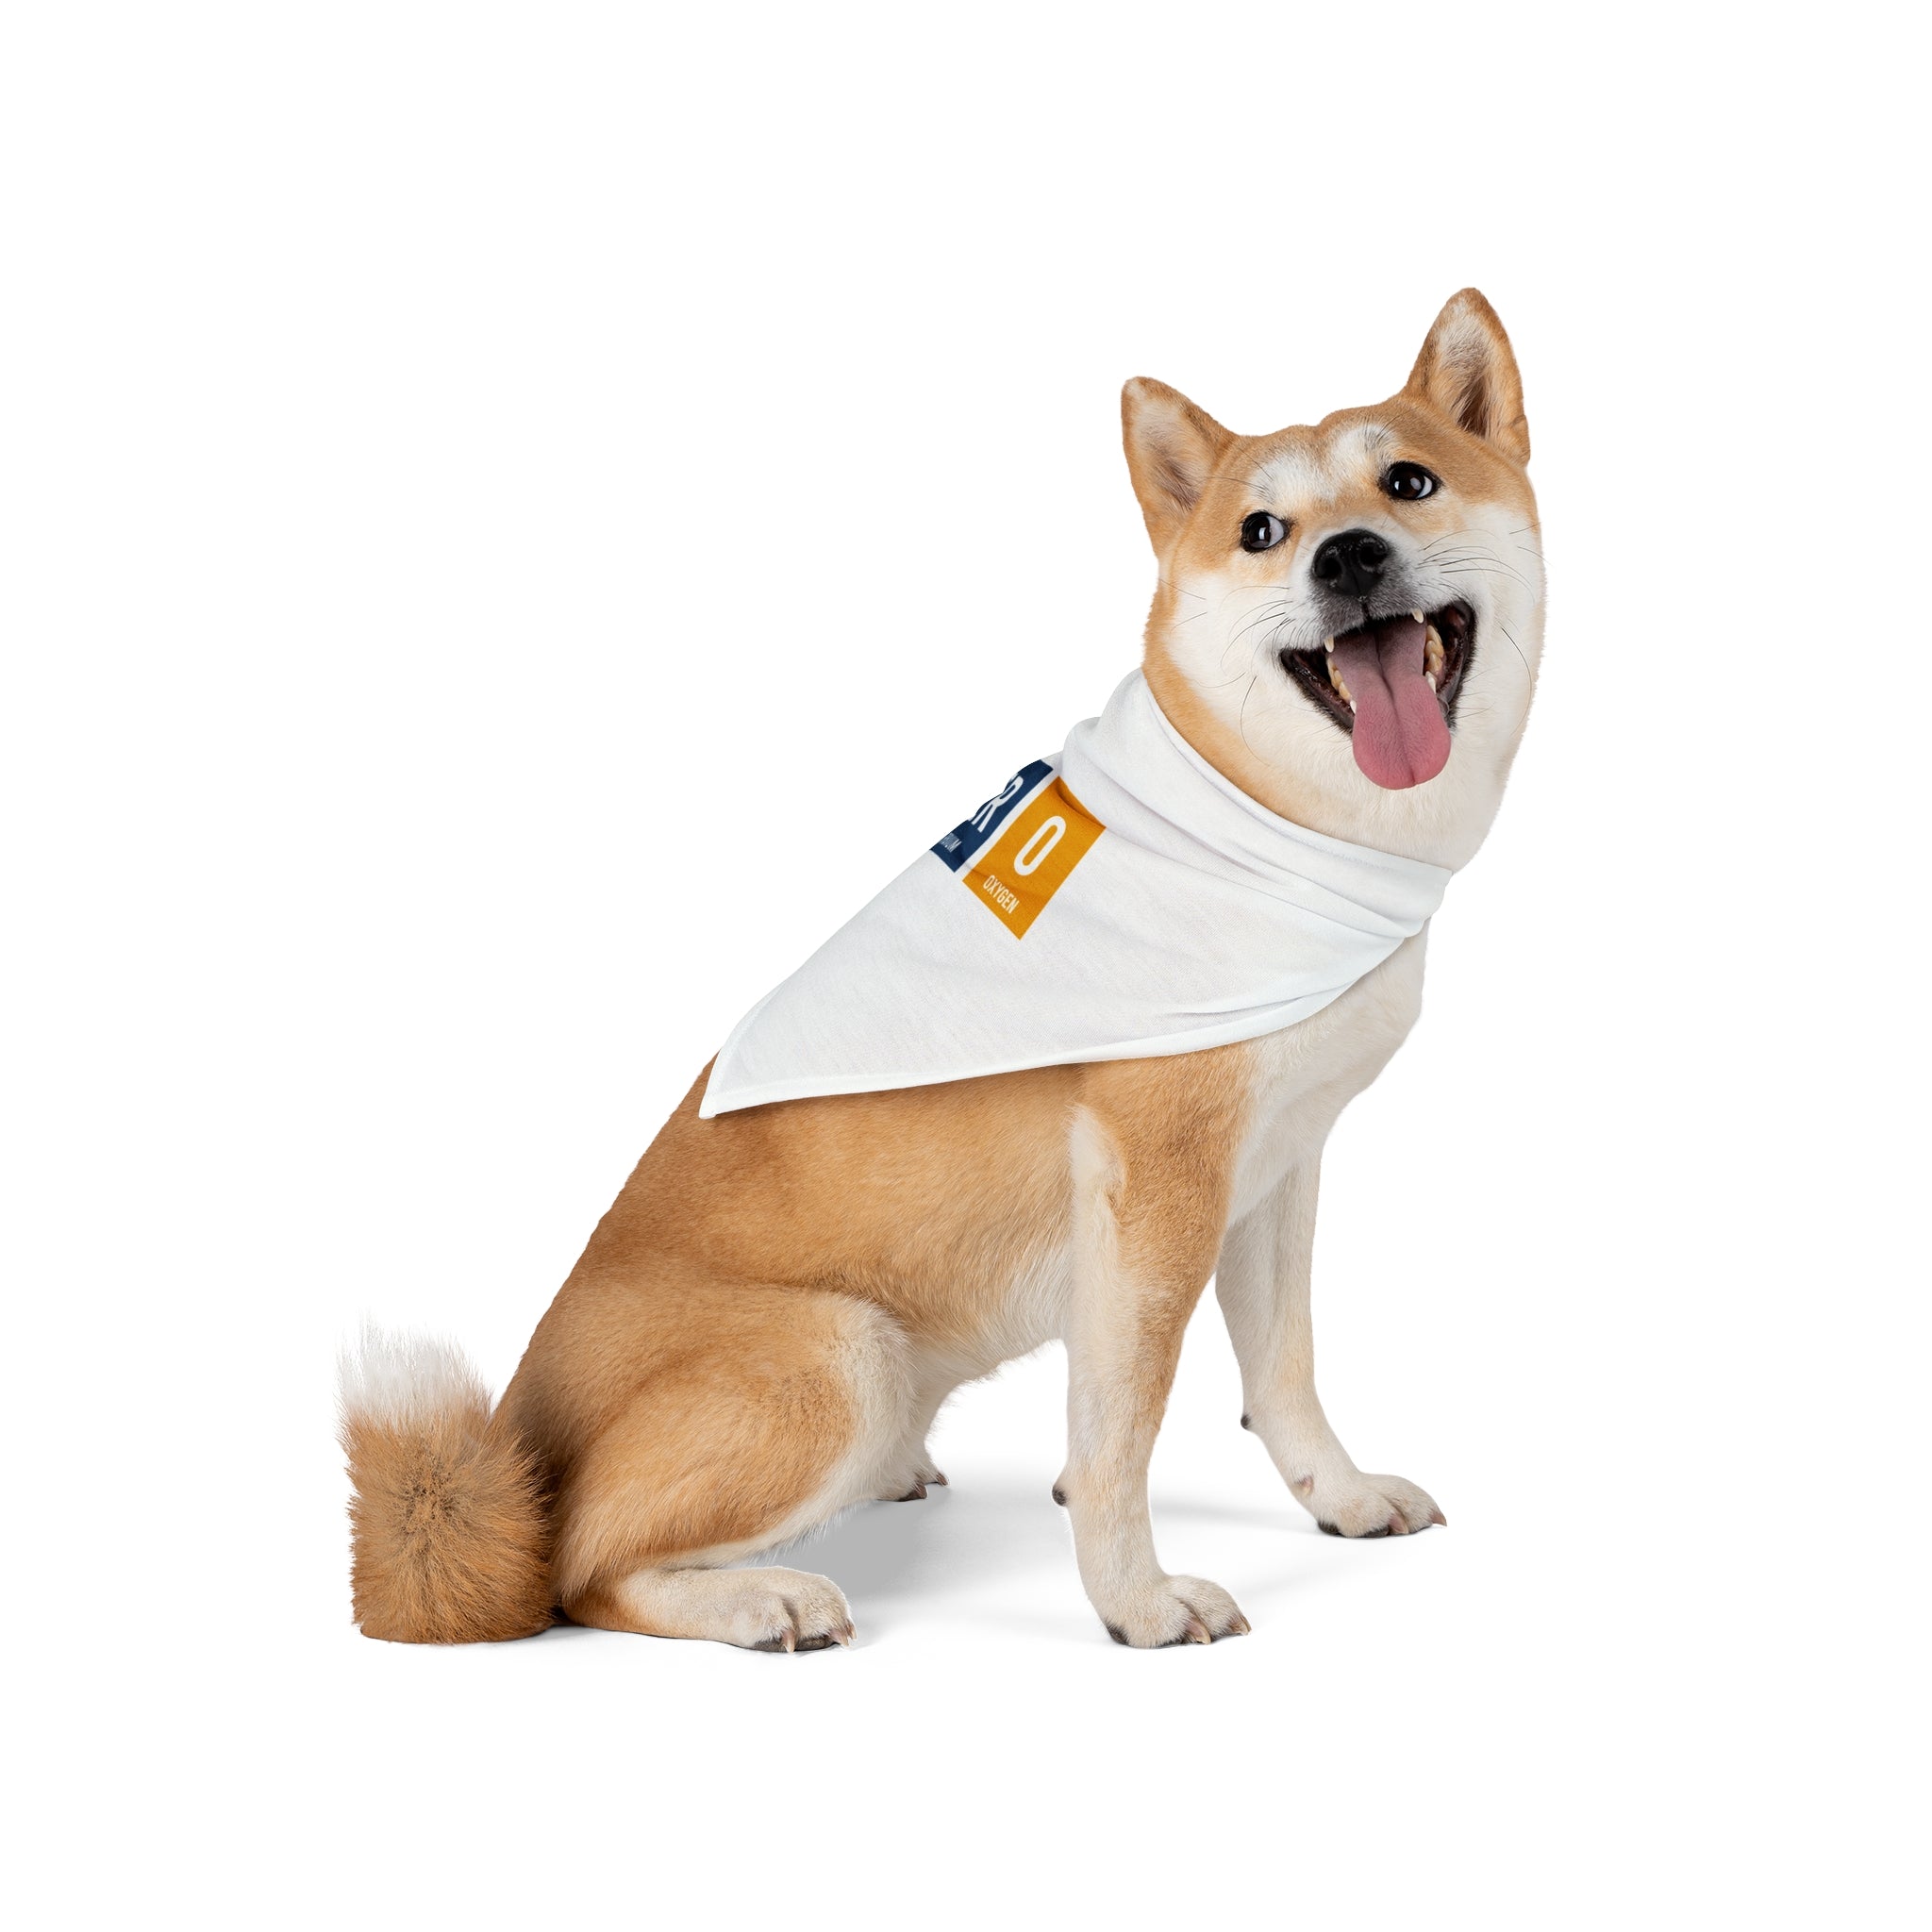 A Shiba Inu dog sits wearing a HERO - Pet Bandana made of soft-spun polyester with a small patch that reads "O". The pet-friendly dog has its tongue out and appears happy.